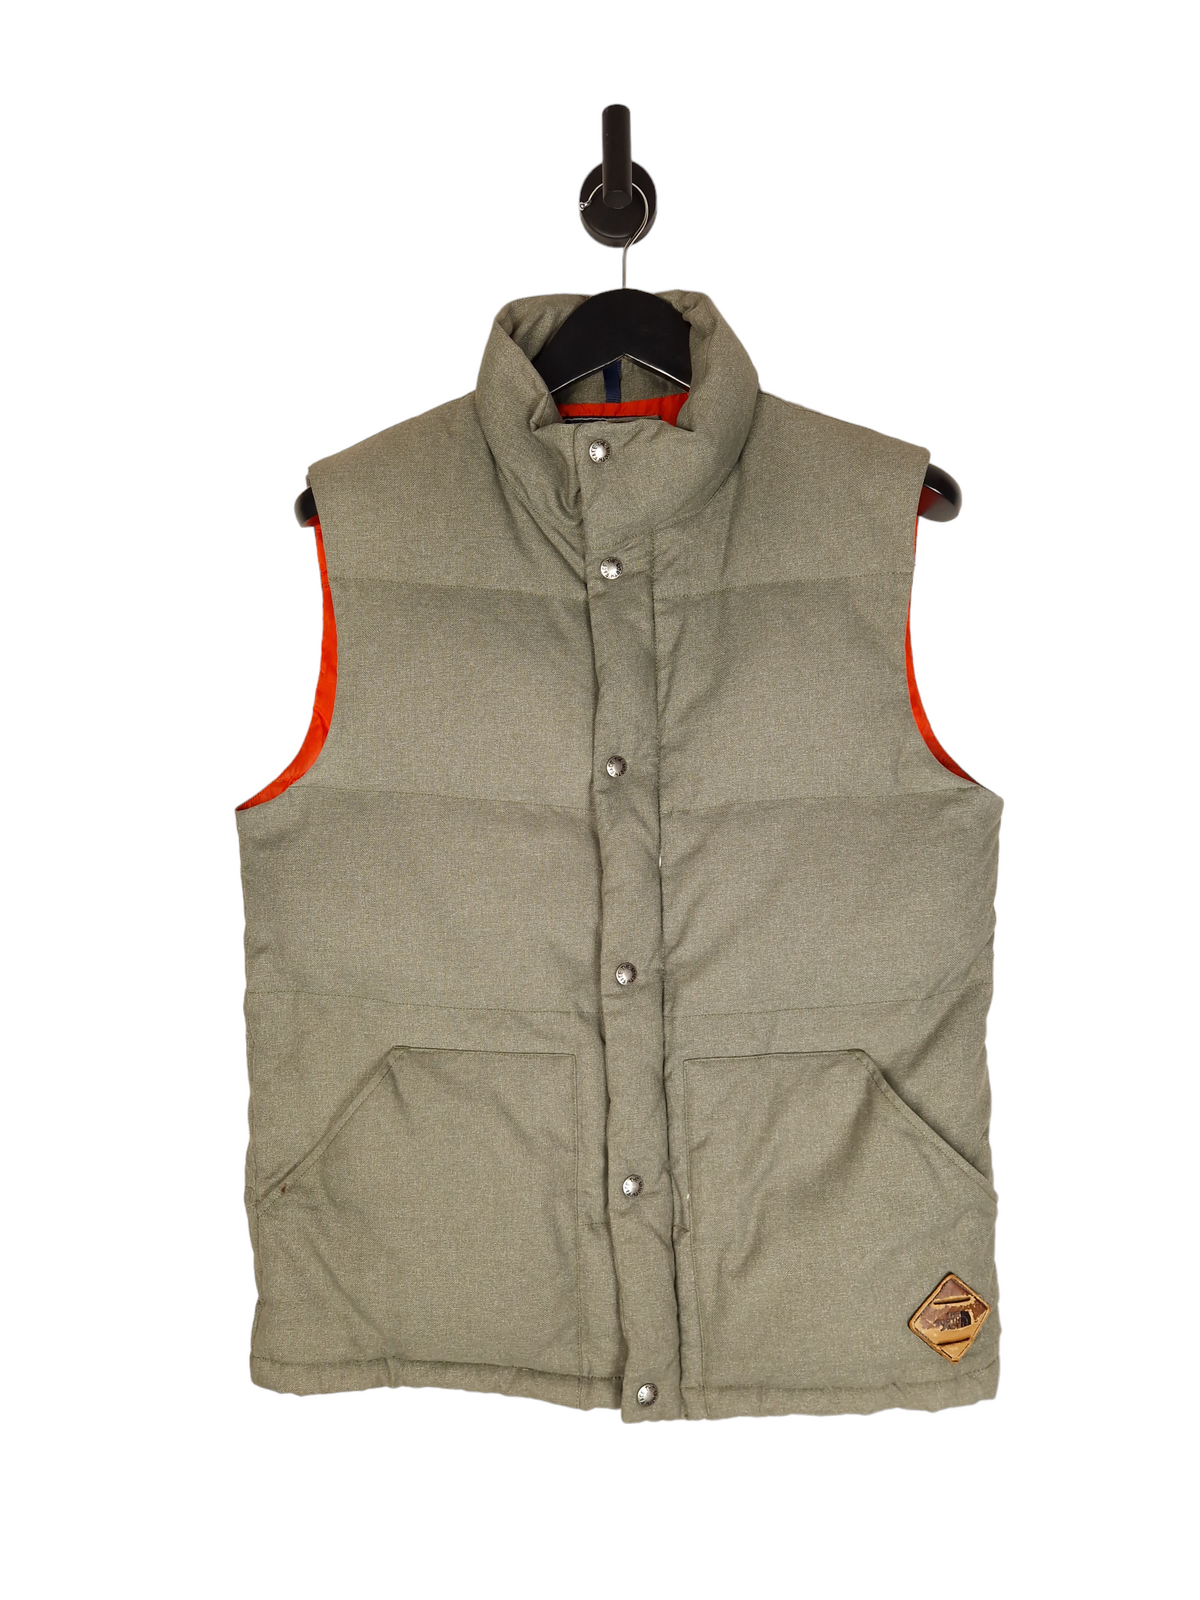 The North Face Gilet - Size Small